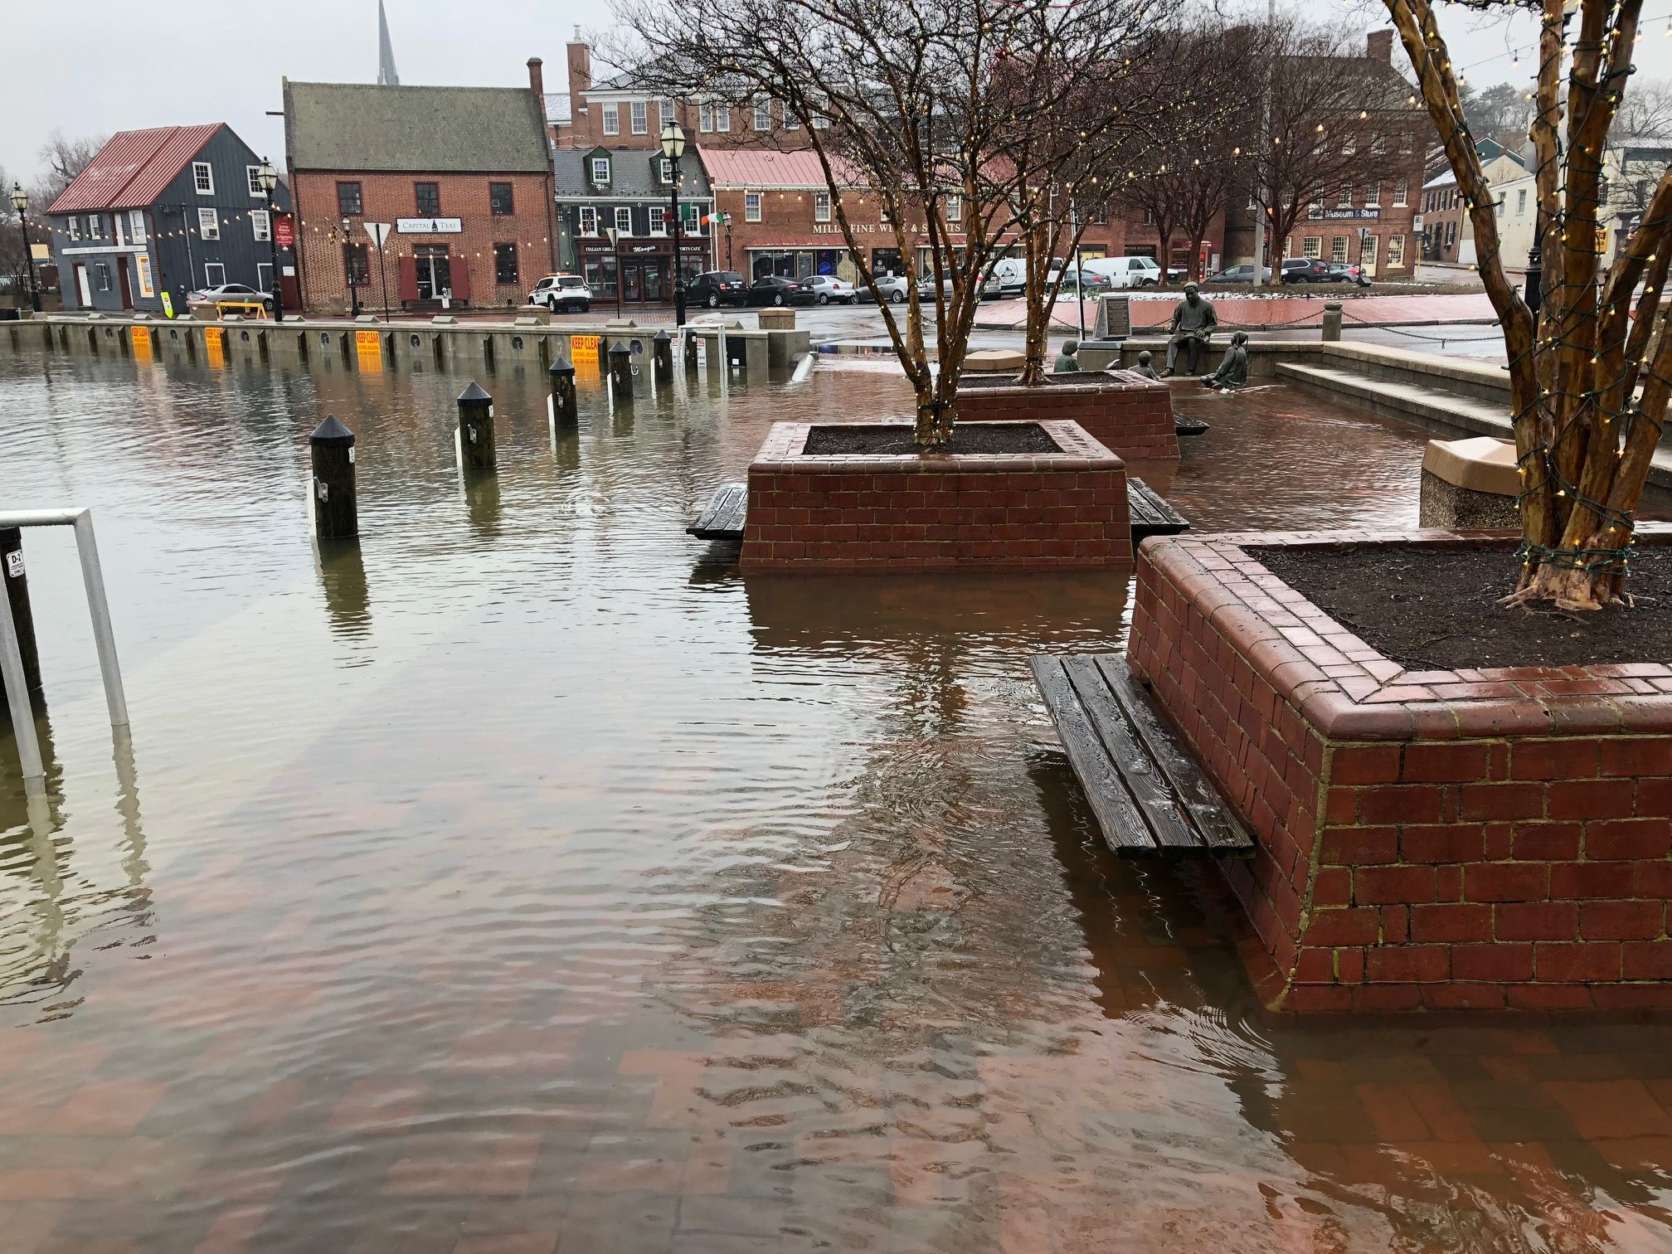 The National Weather Service said a Coastal Flood Warning would remain in effect until 6 p.m., and that water levels were 2 to 3 feet above normal, pushing water up through storm drains. (WTOP/Dave Dildine)